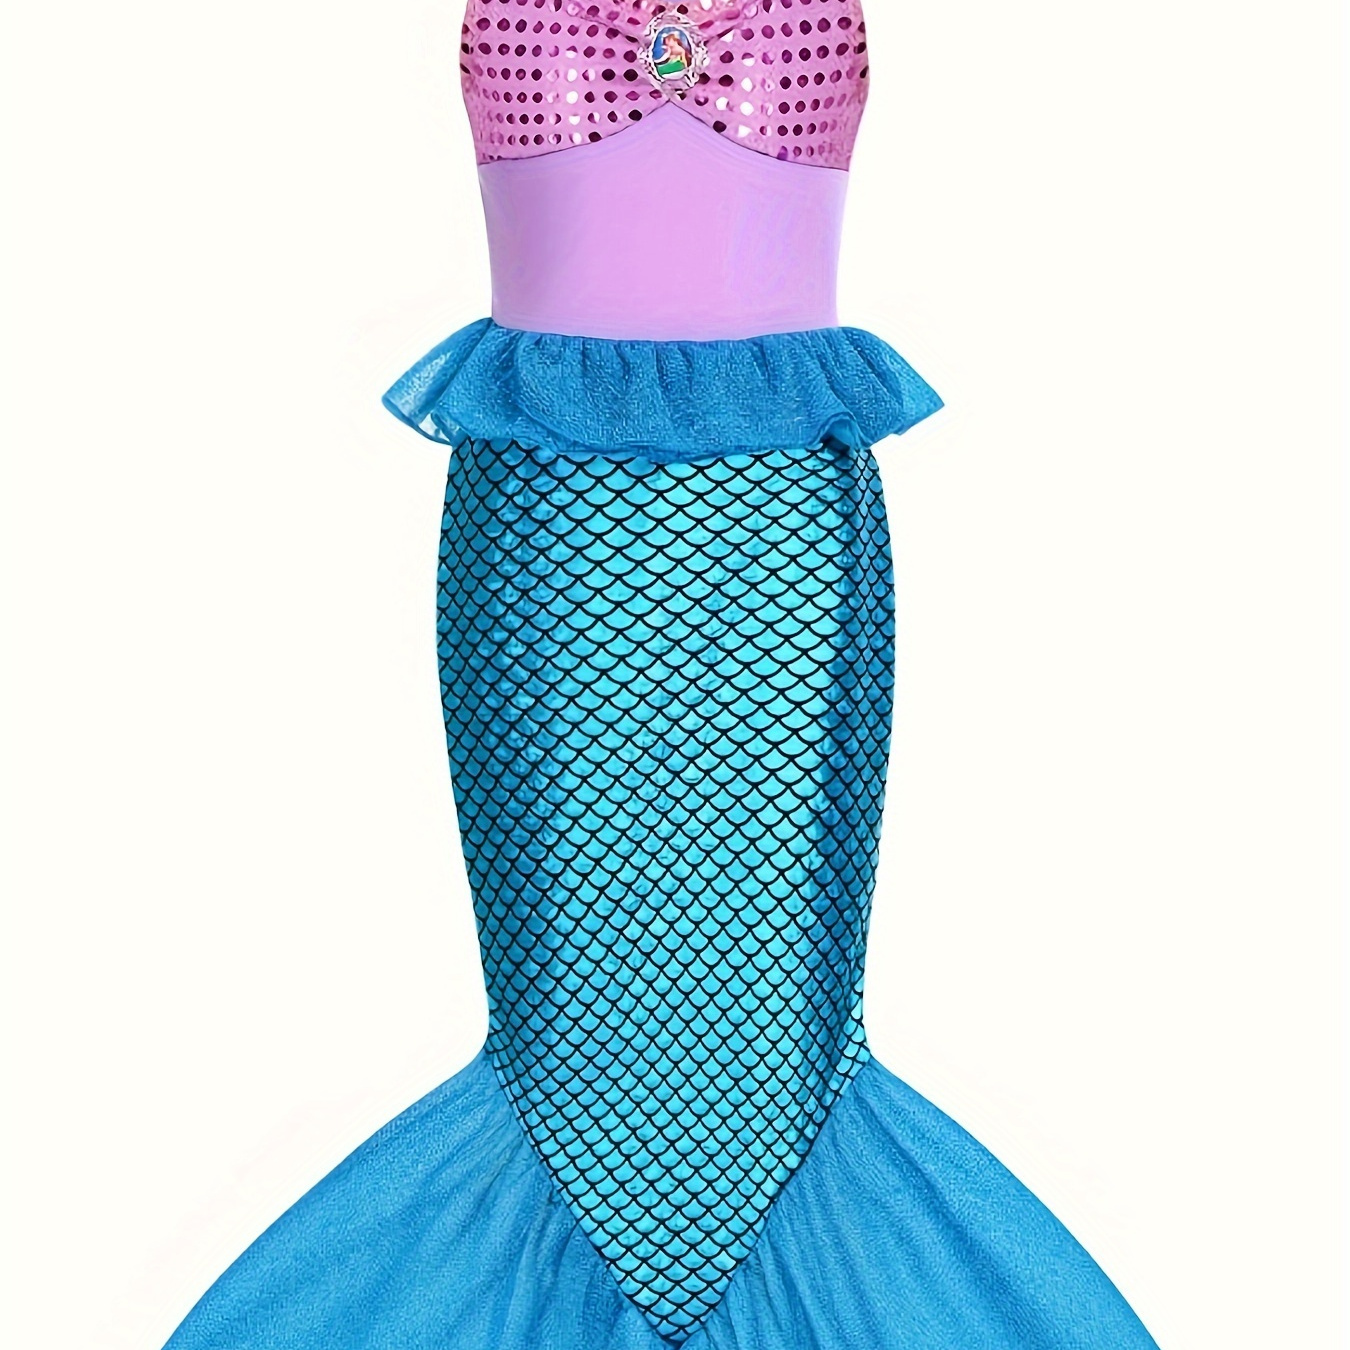 

Girl's Dress Up Dreamy Fish Scale Print Princess Dress For Carnival Halloween Party Performance Gift